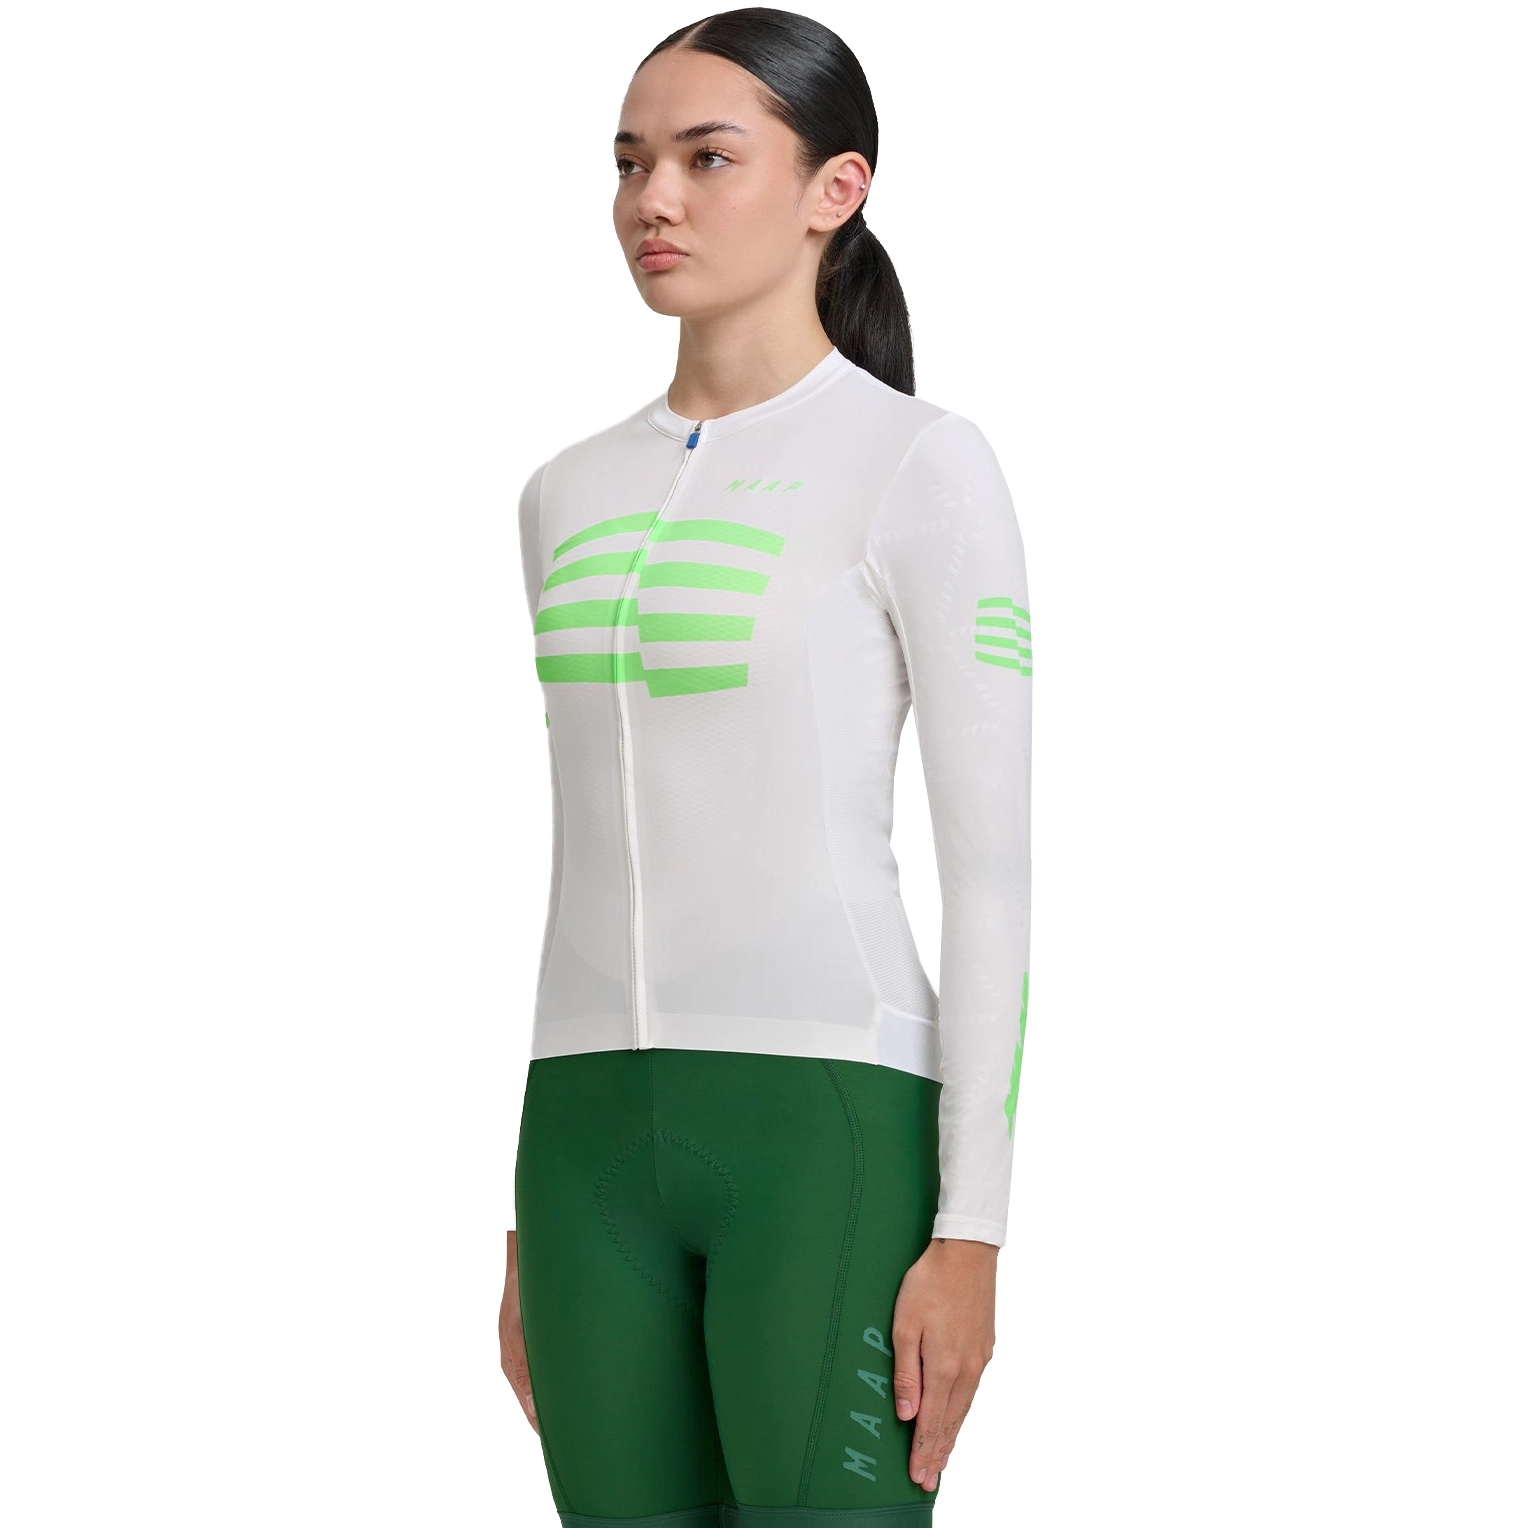 Picture of MAAP Sphere Pro Hex Long Sleeve Jersey Women - white